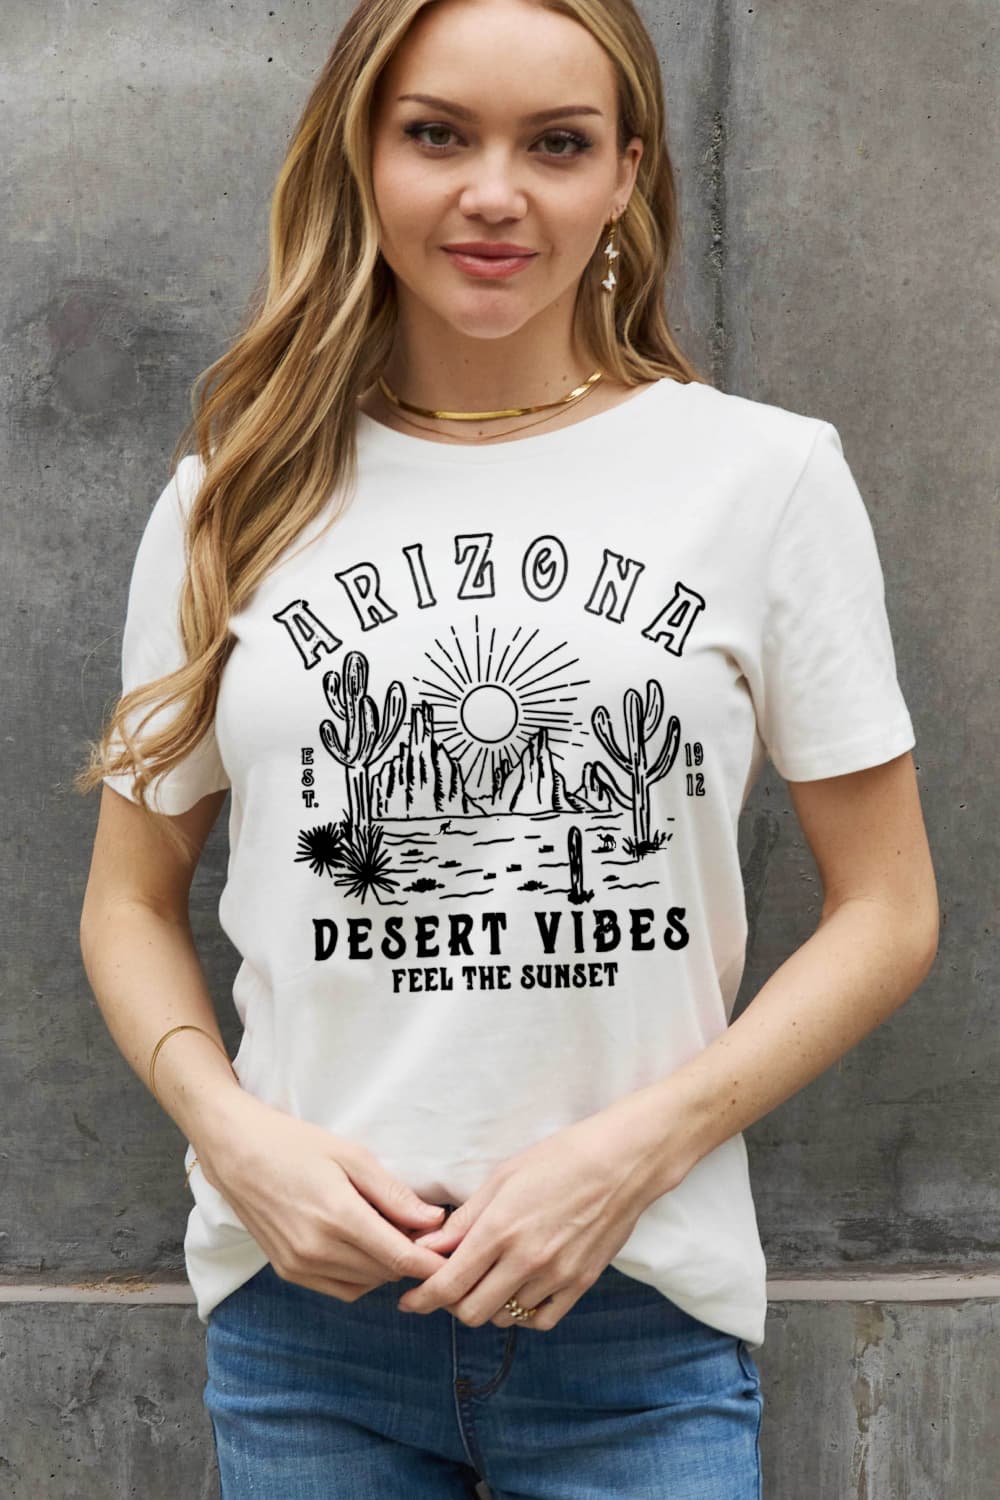 Simply Love Full Size ARIZONA DESERT VIBES FEEL THE SUNSET Graphic Cotton Tee BLUE ZONE PLANET